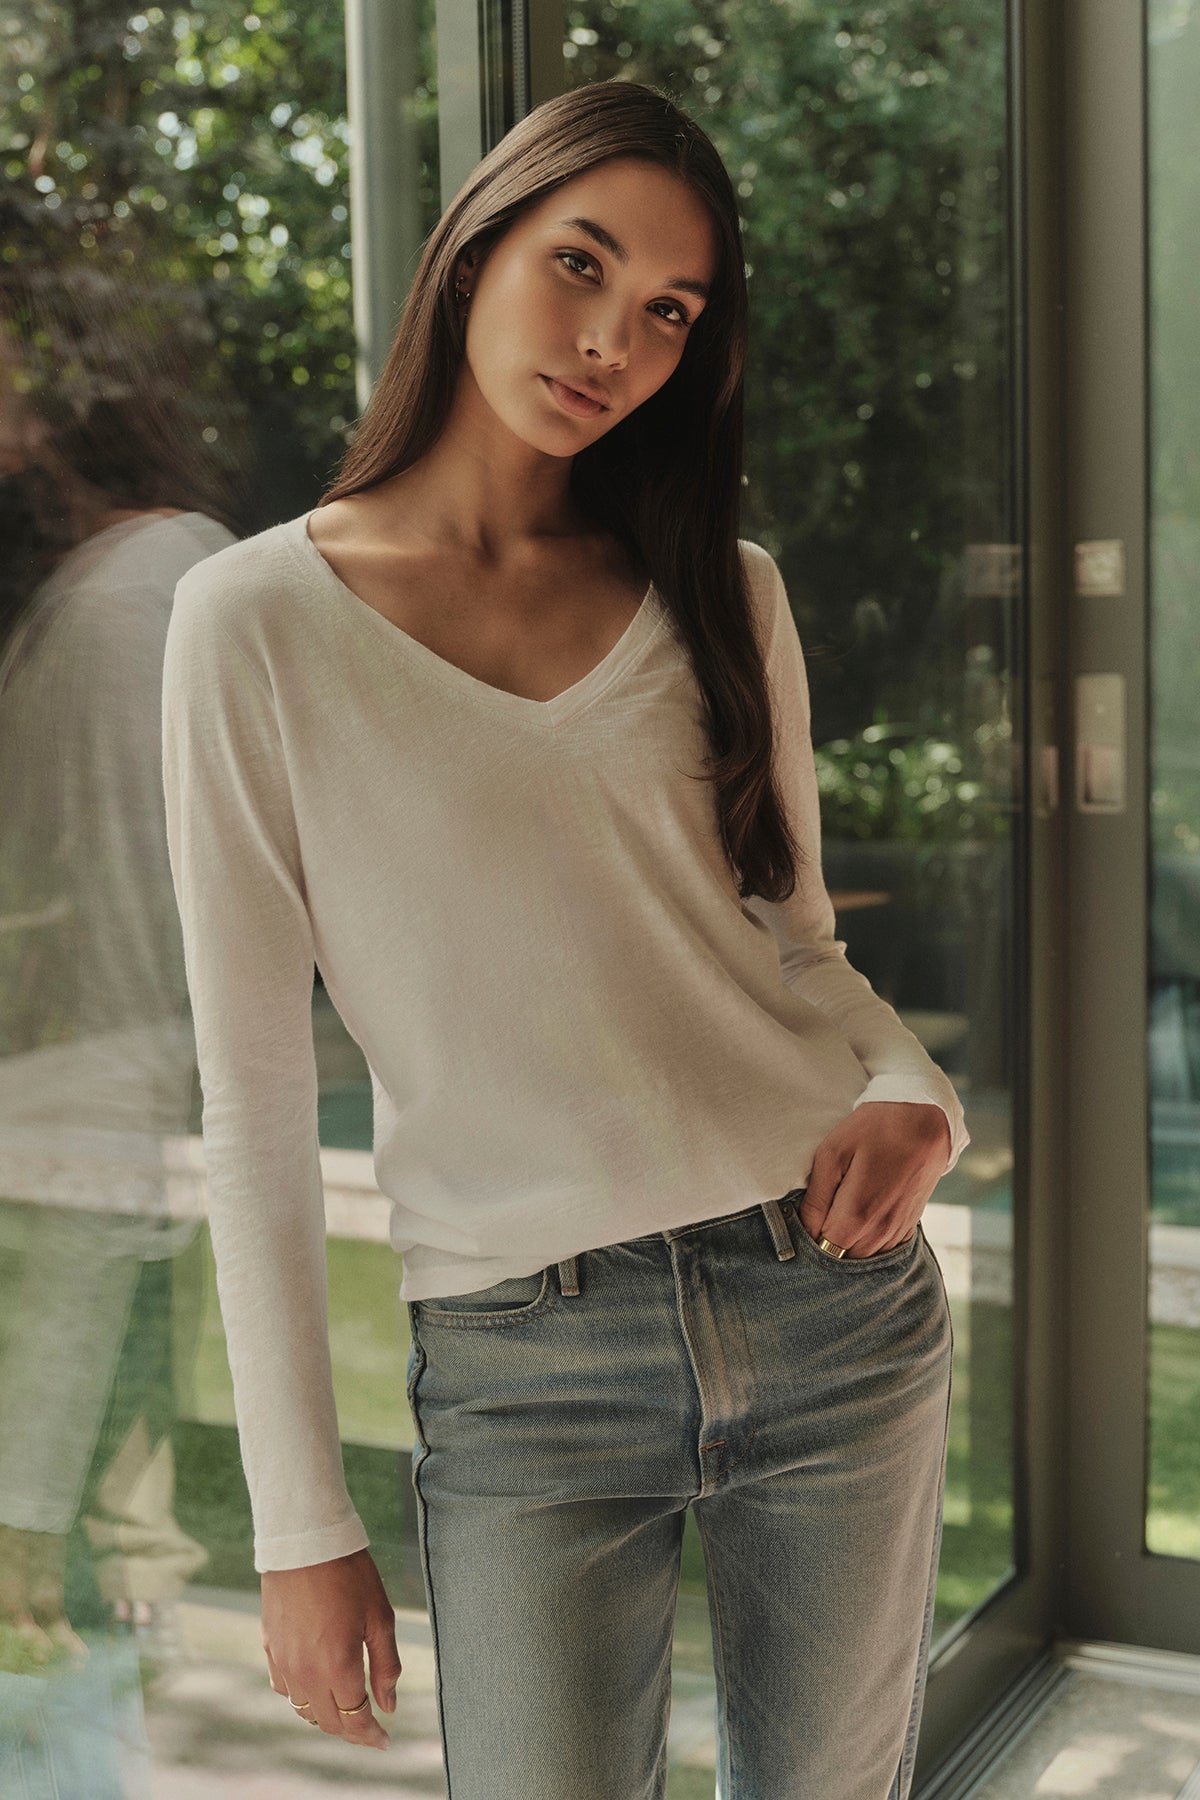 A woman with long brown hair, wearing a white BLAIRE TEE by Velvet by Graham & Spencer and blue jeans, stands in front of a glass door with greenery outside.-37366972711105